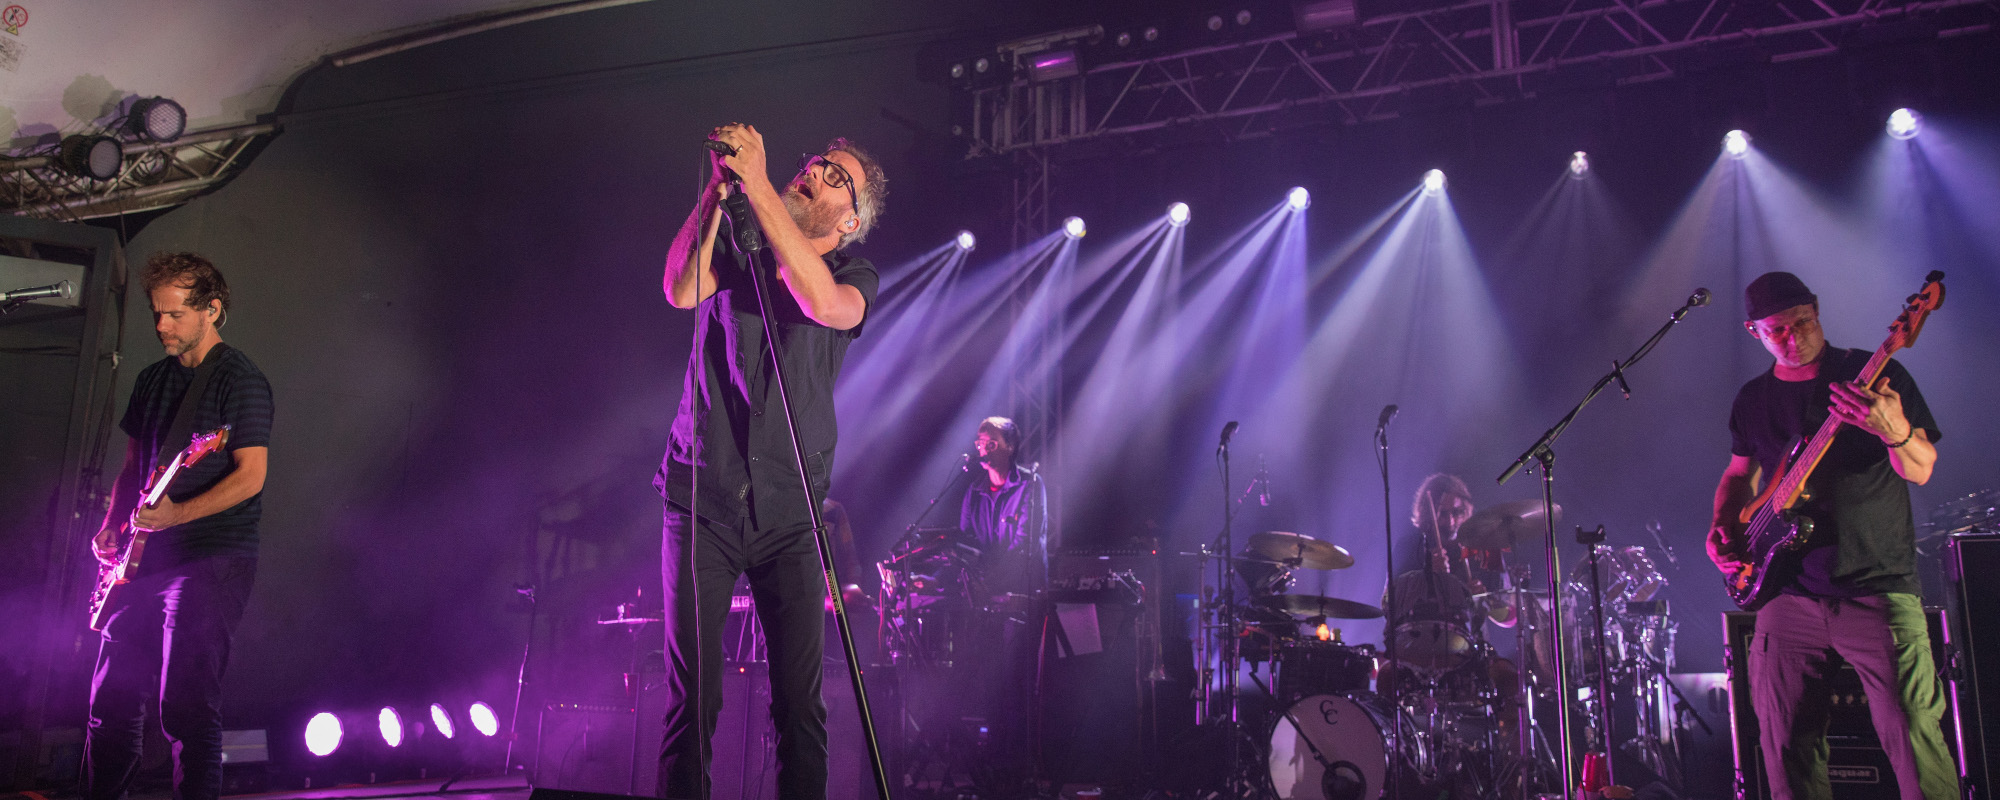 Behind the “Meaningless” Band Name The National